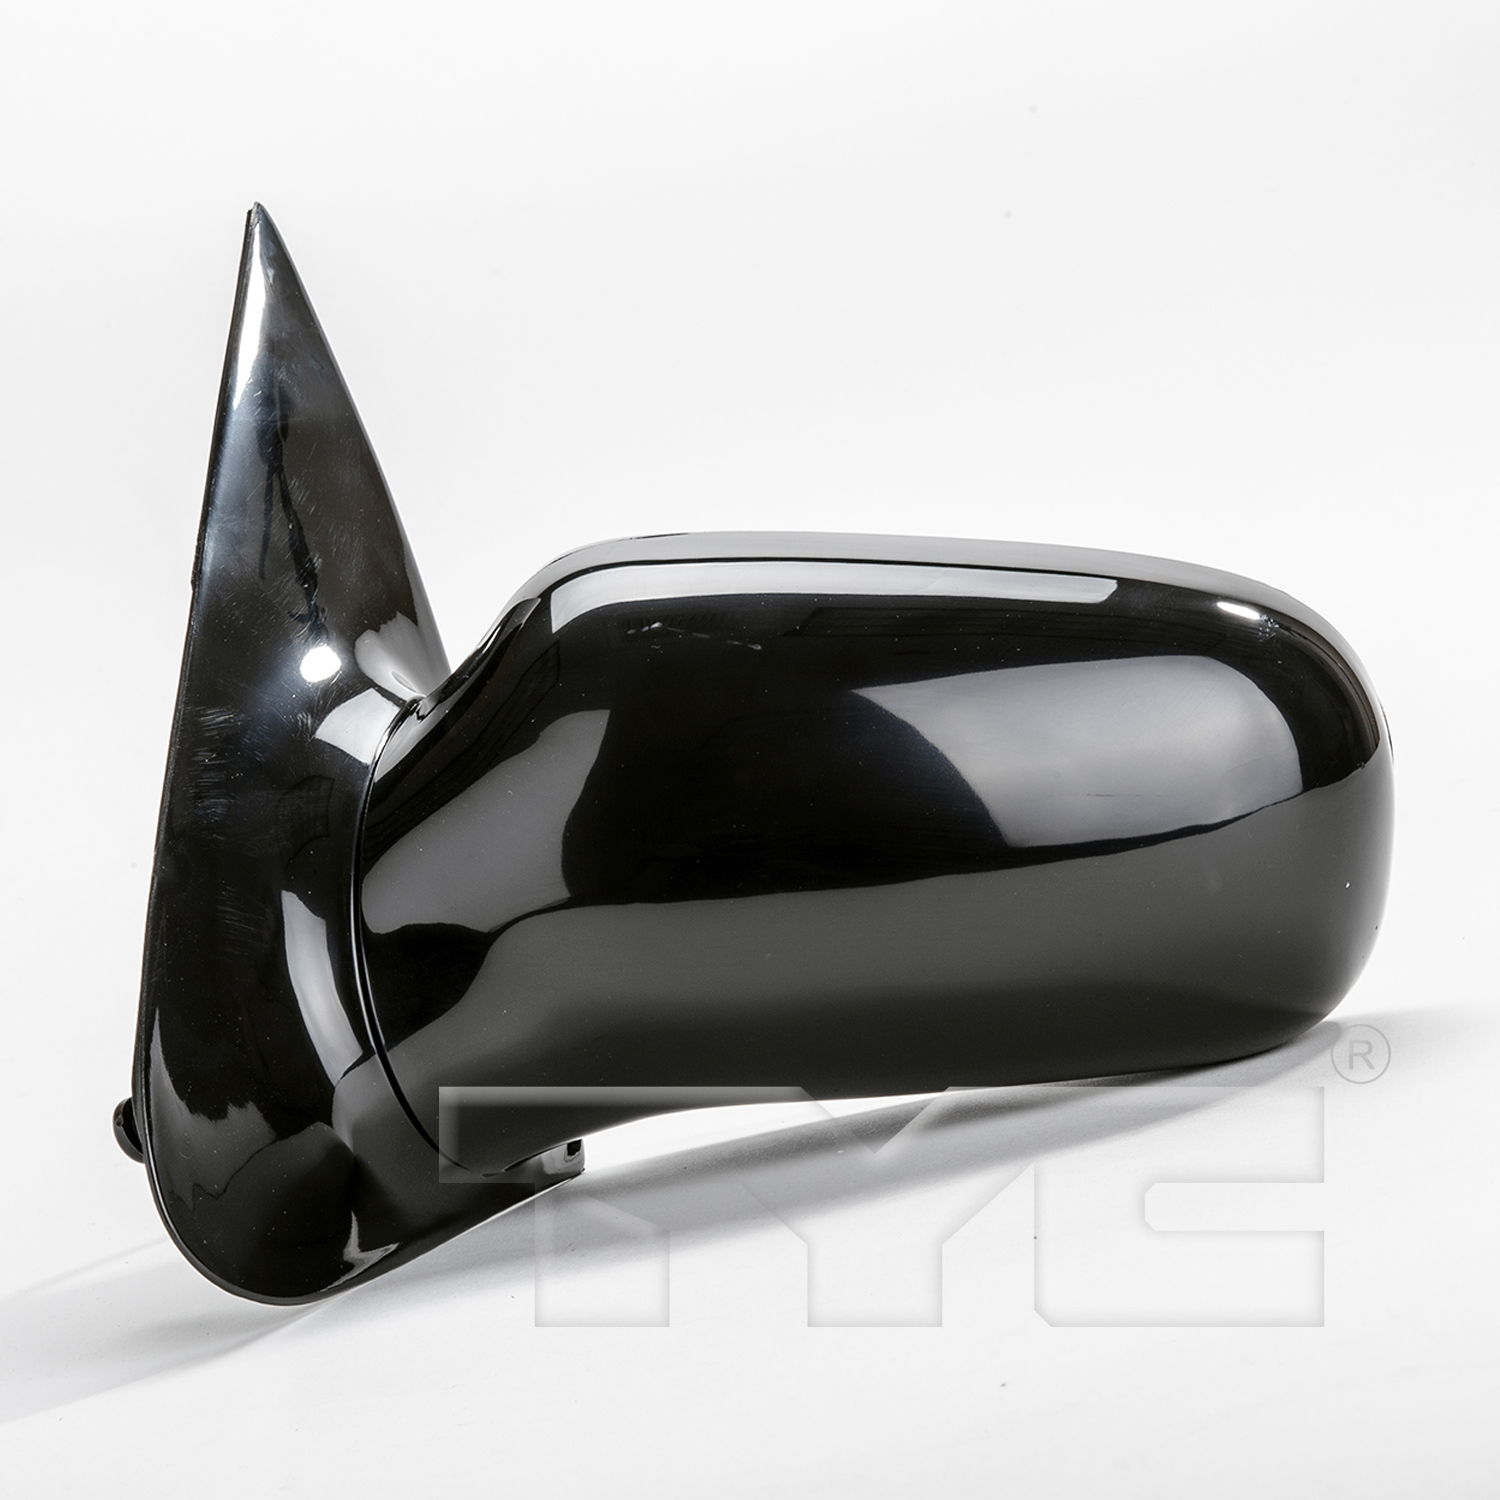 Aftermarket MIRRORS for CHEVROLET - CAVALIER, CAVALIER,95-04,LT Mirror outside rear view